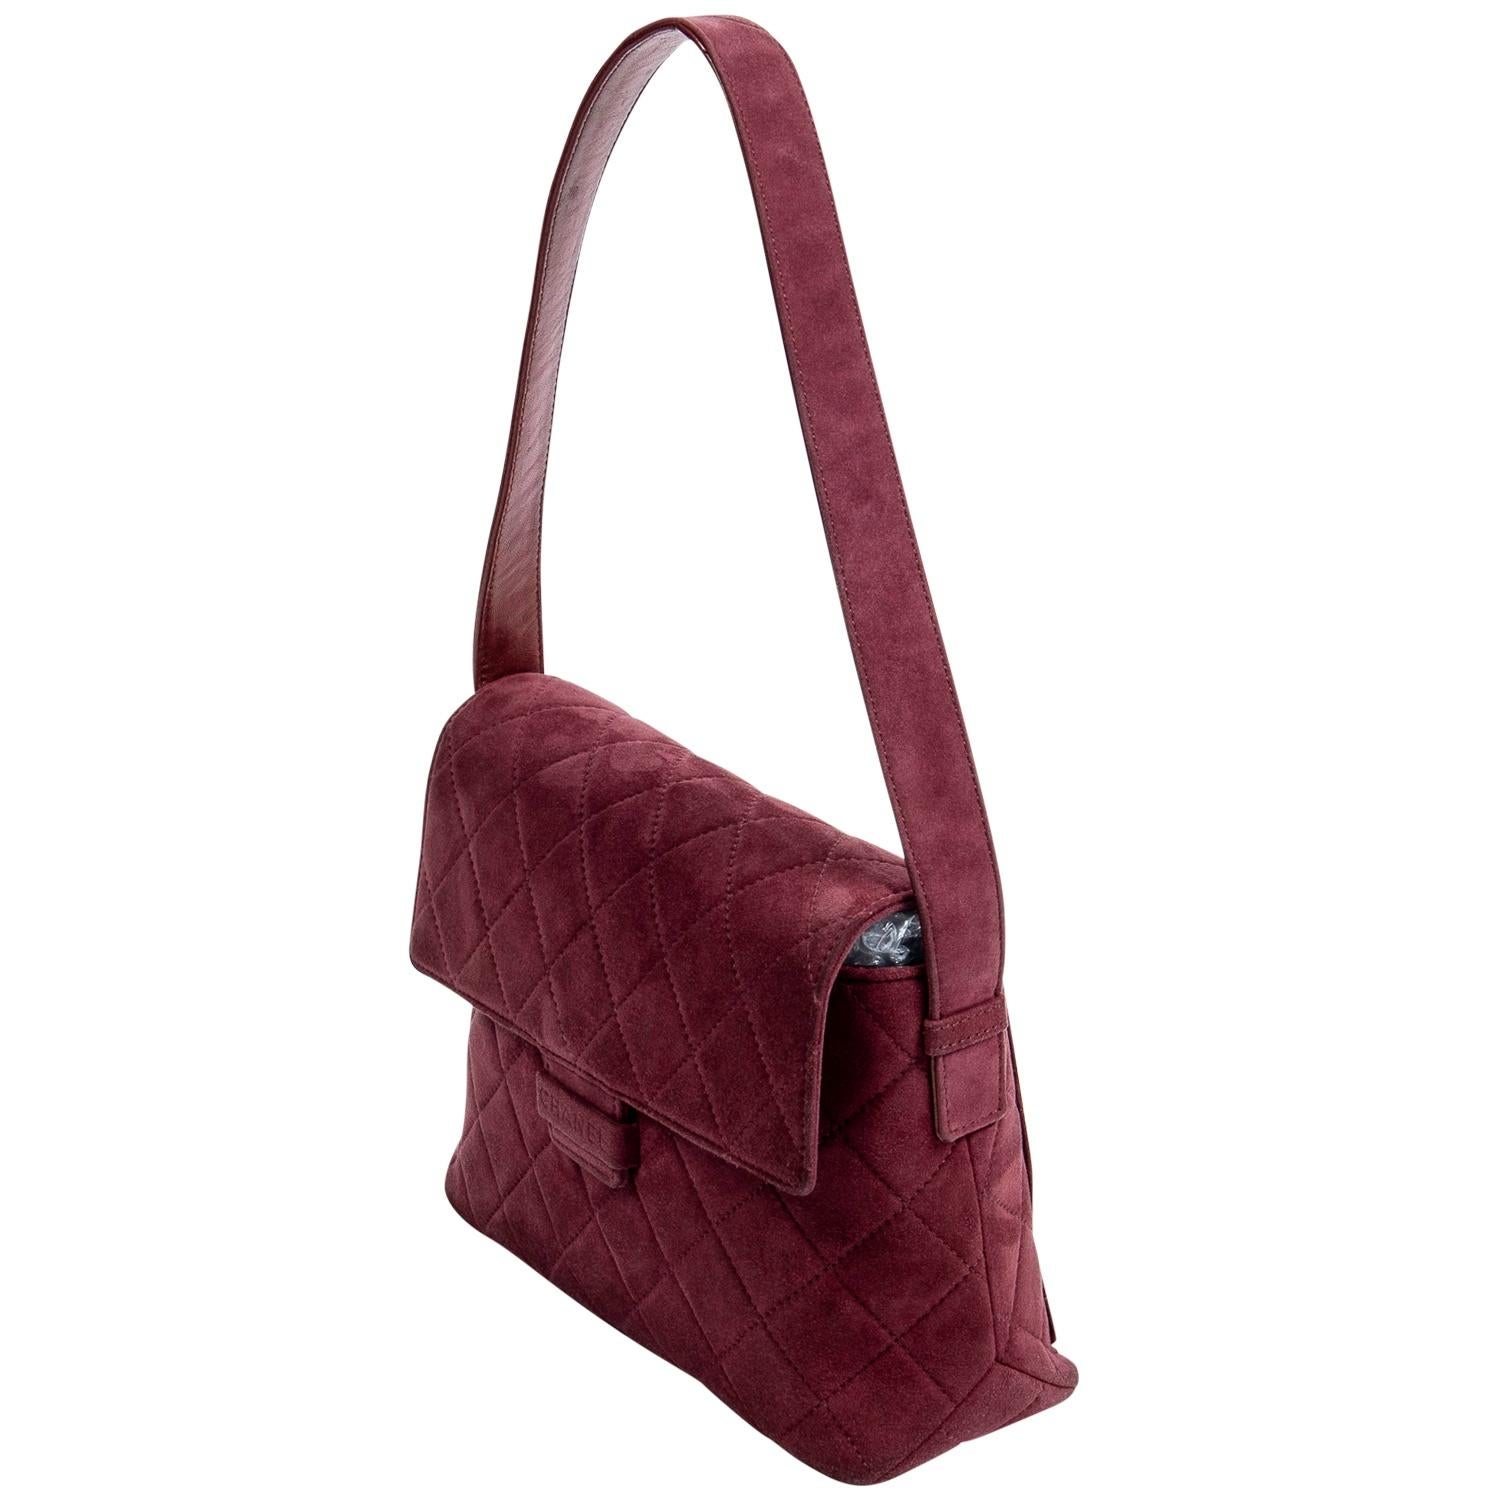 Stunning late 90s vintage treasure crafted of maroon quilted suede, with gold-tone hardware, a tonal leather trim, a single shoulder strap, and an exterior slip pocket on the back The CHANEL logo on the front is perfectly discrete and the pull